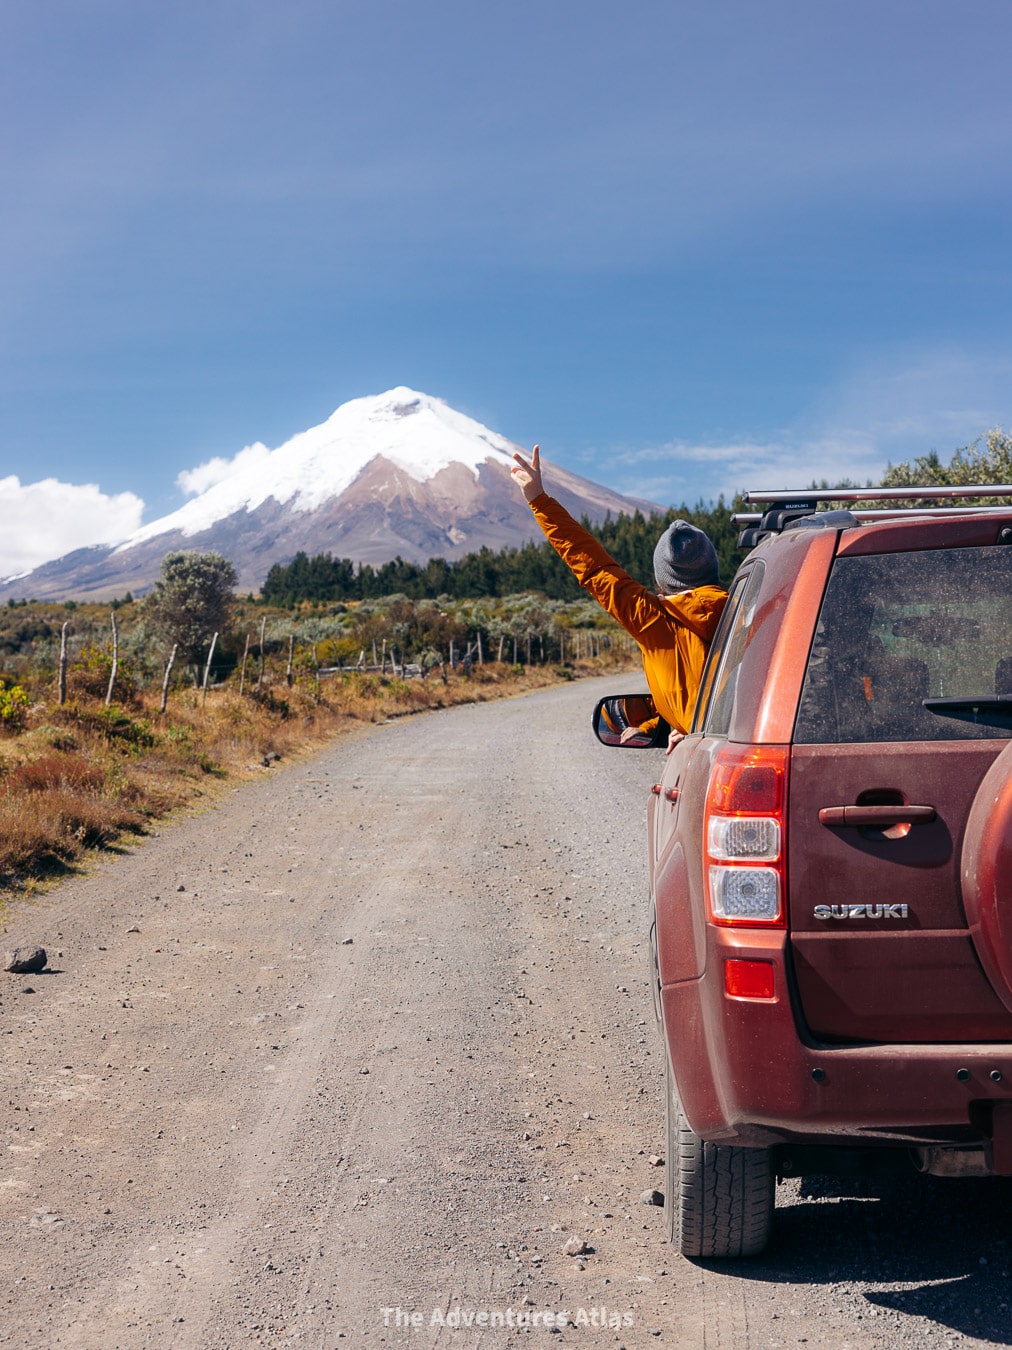 Taking a road trip in Ecuador is the best way to see the country